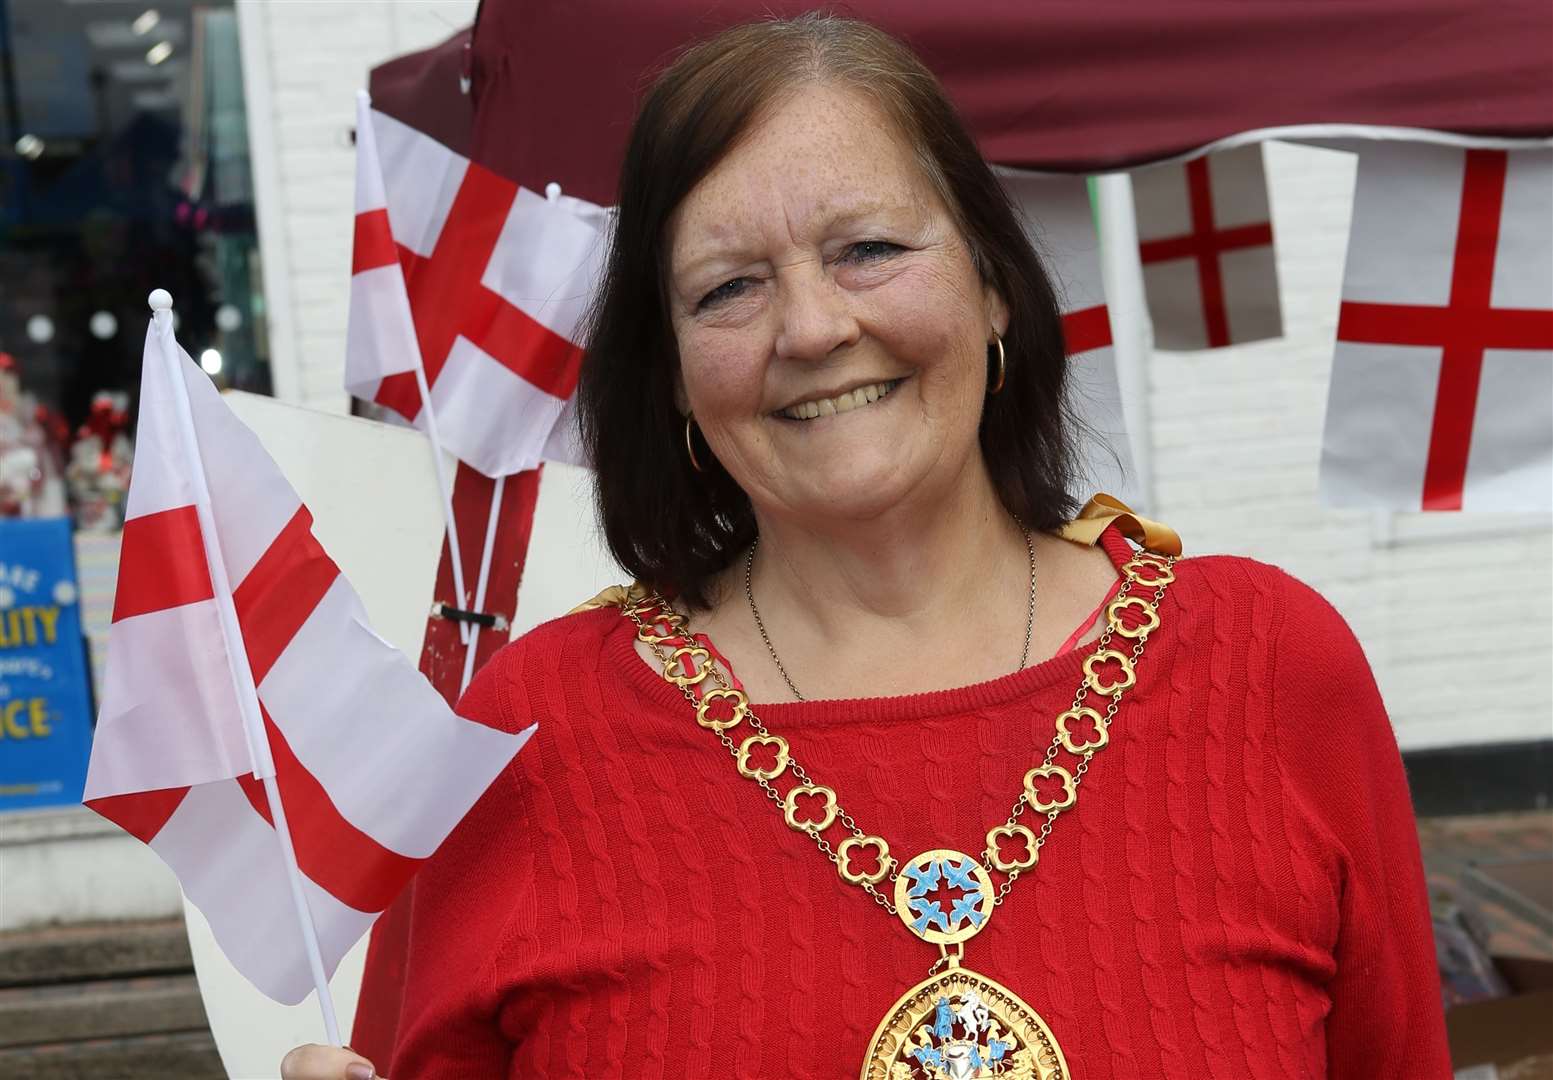 Former Mayor of Swale, Cllr Lesley Ingham, at an event to celebrate St George's Day in Sittingbourne High Street in 2017